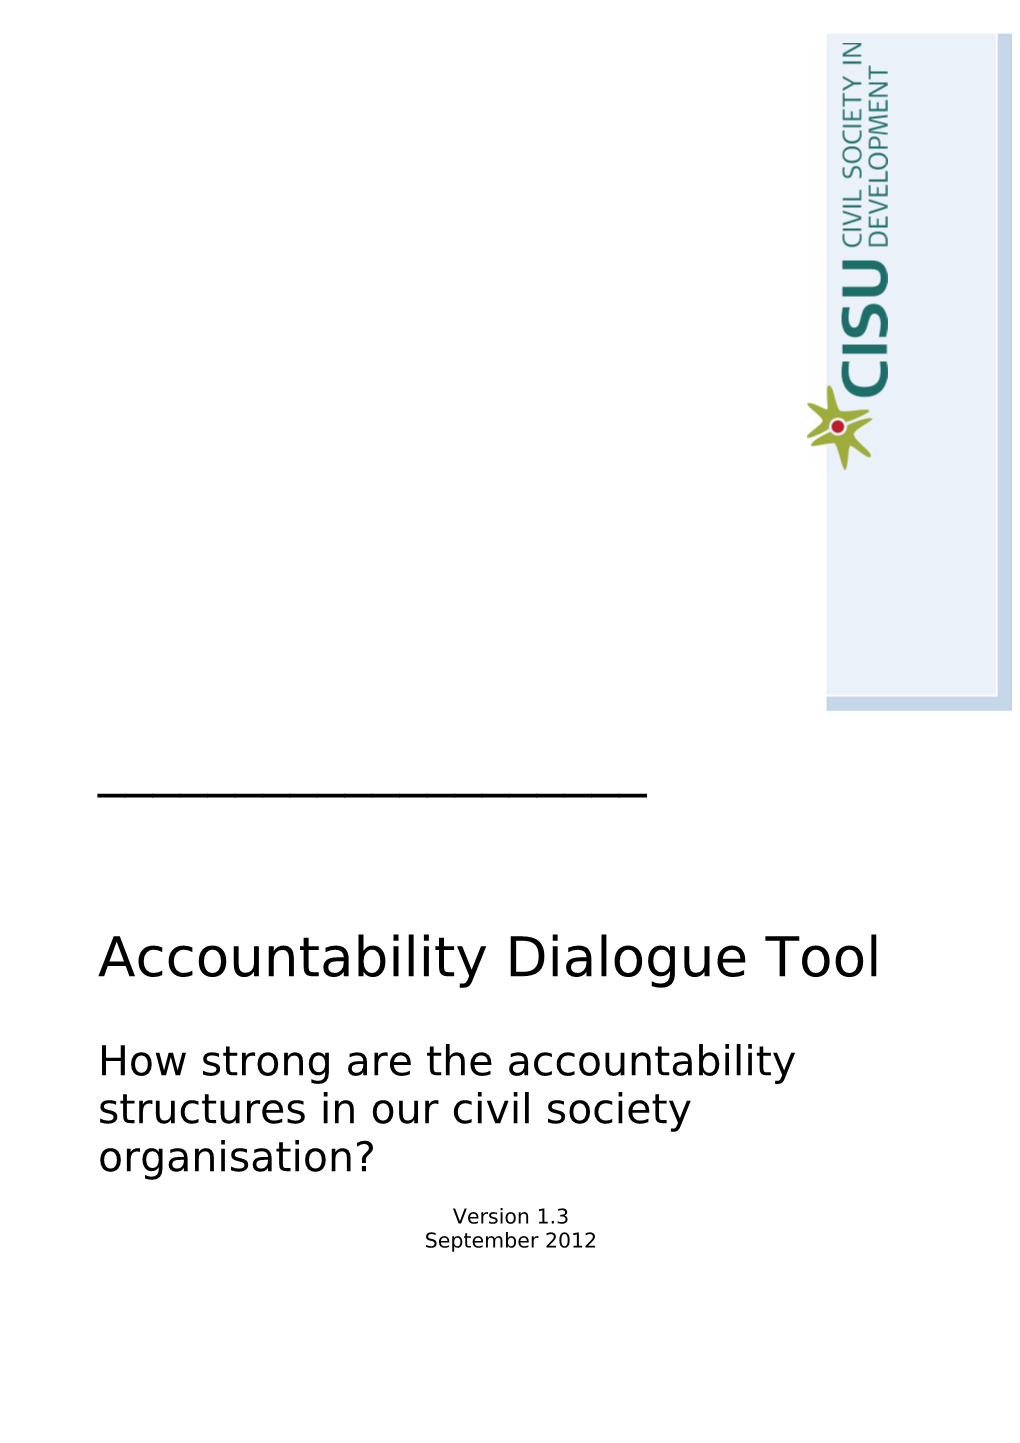 Health Check on Accountability Structures in Civil Society Organisations, NGO S and CBO S